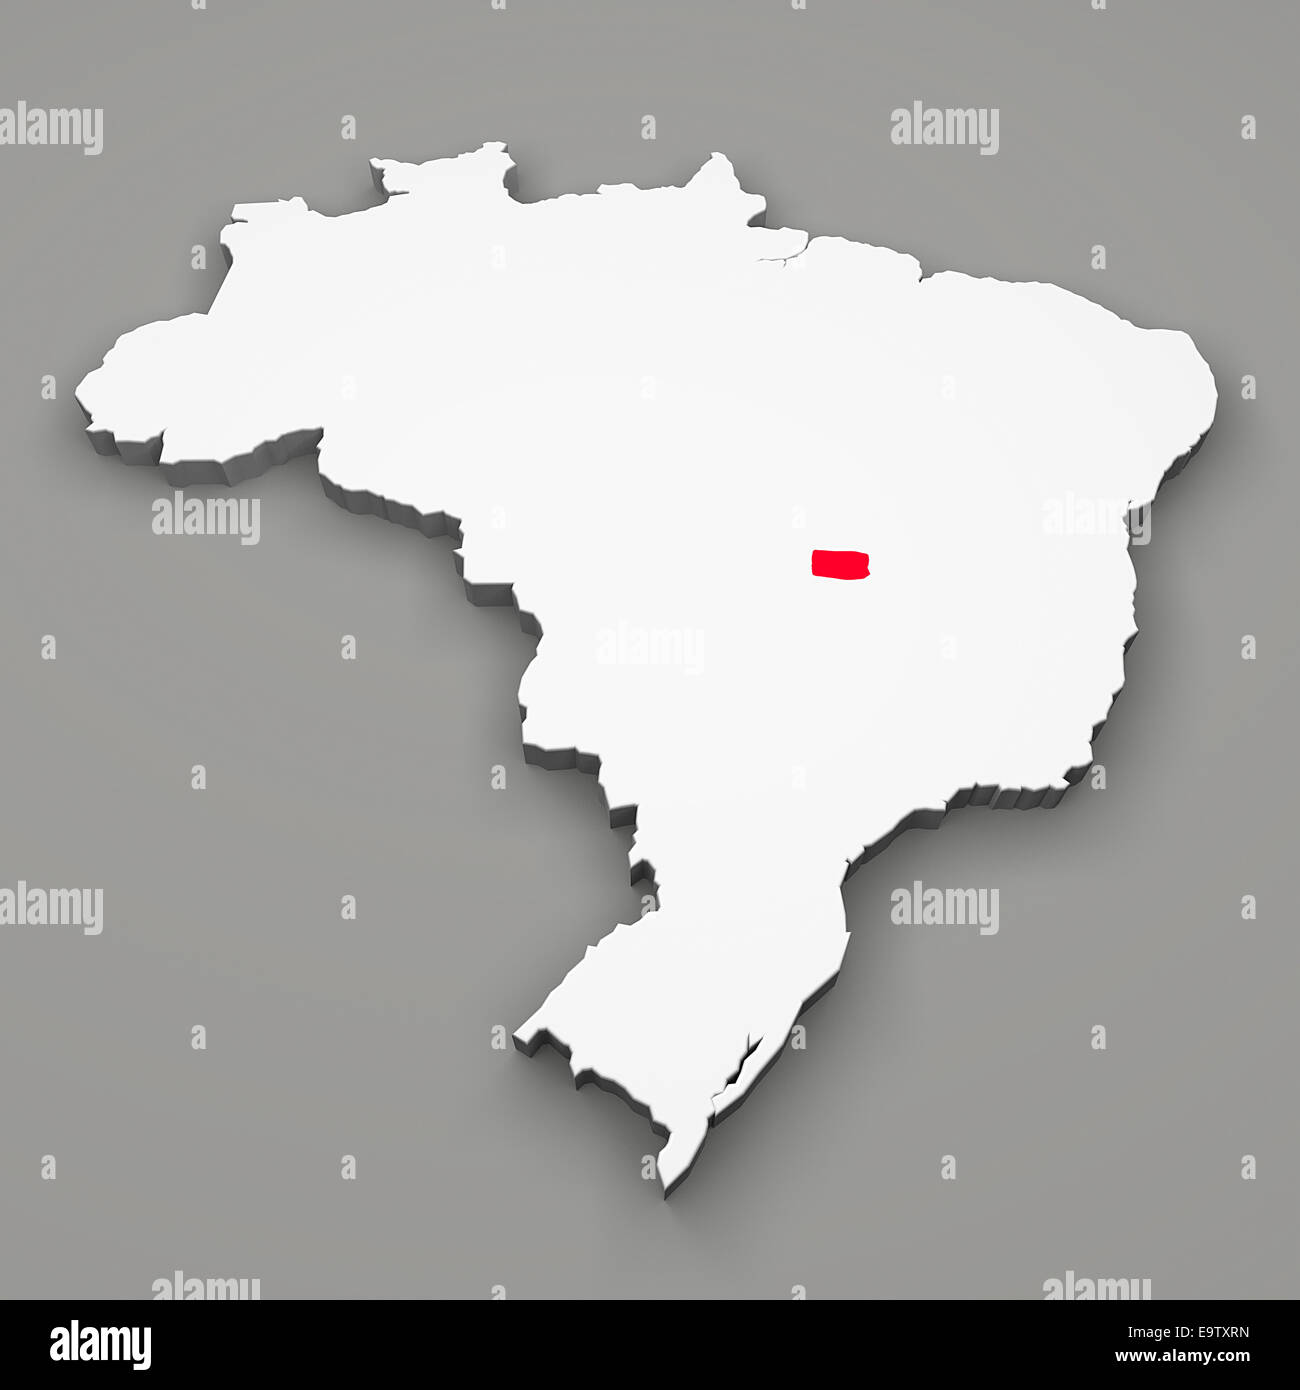 Federal District on map of Brazil on gray background Stock Photo